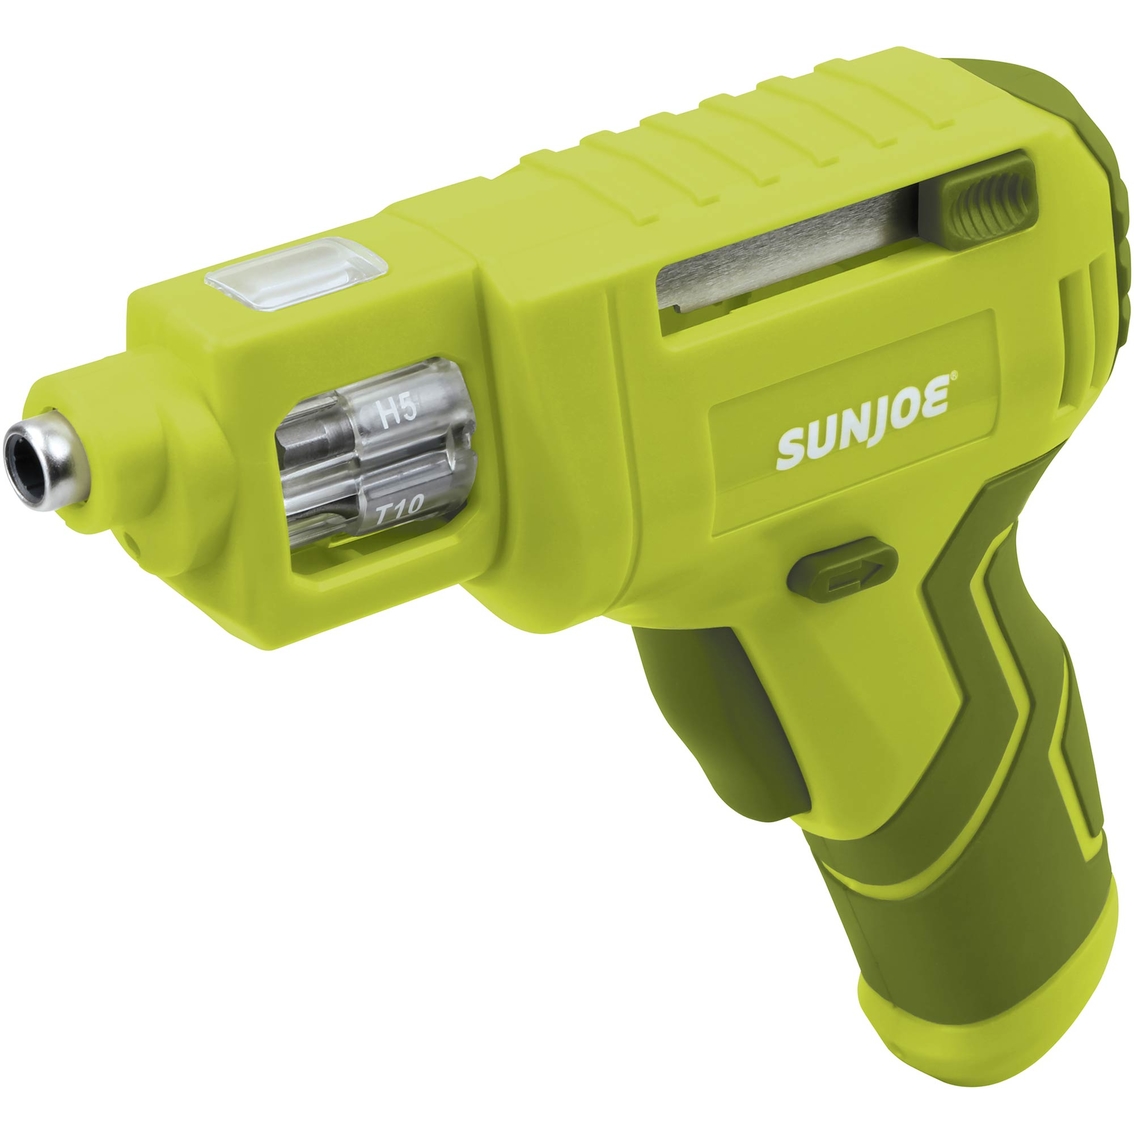 Sun Joe SJ4VSD Lithium-Ion Cordless Rechargeable Power With Quick Change Bit System - Image 2 of 3